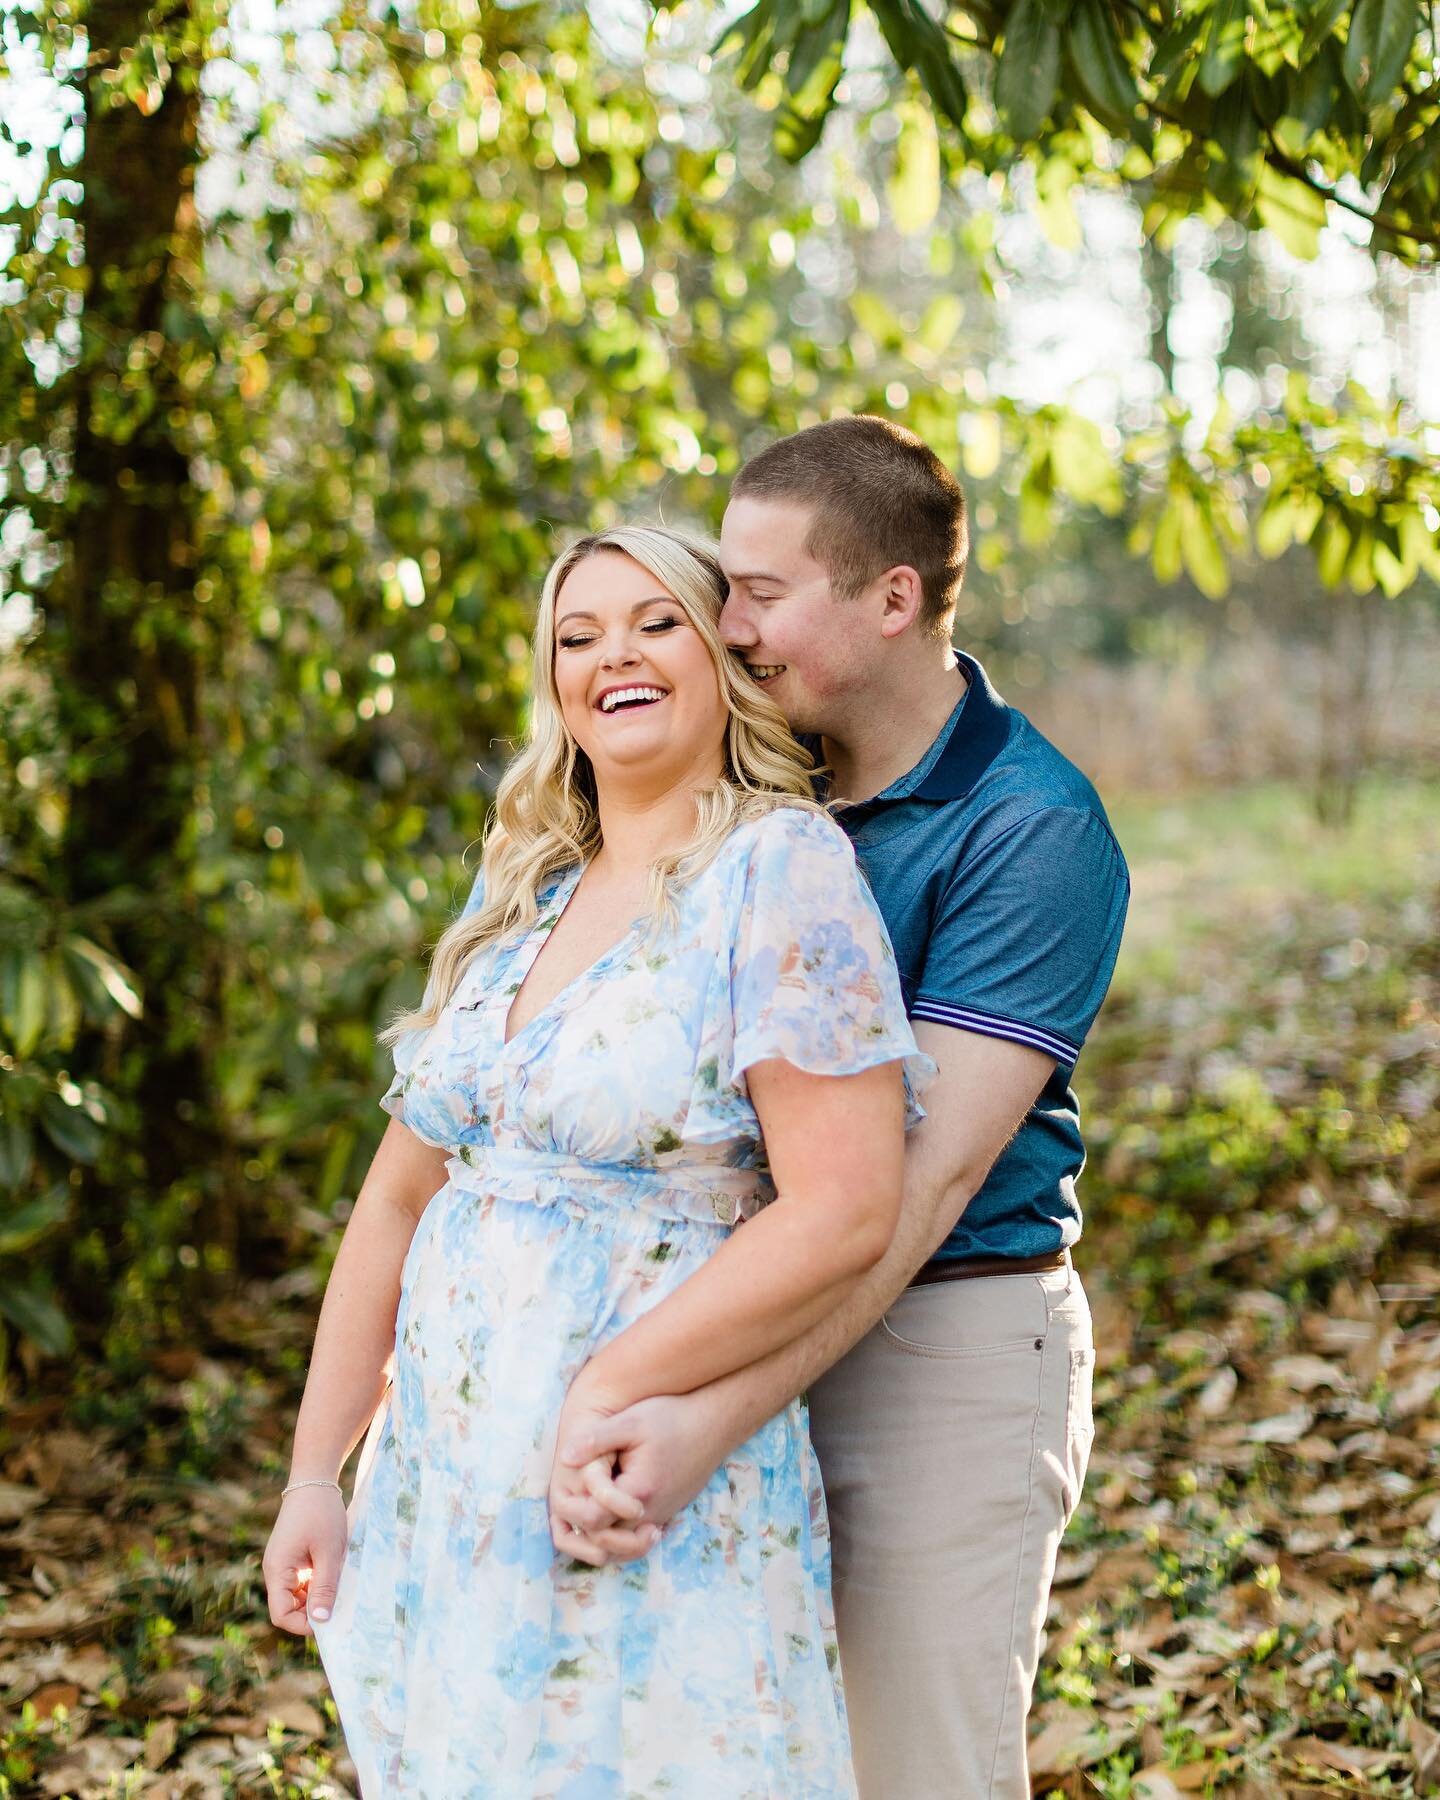 T-MINUS 30 DAYS until these two tie the knot! 💍👰🏼&zwj;♀️

#knoxvilleweddingphototgrapher #knoxvillebride #knoxvilleweddings #easttennesseeweddingphotographer #nashvilleweddingphotographer #tennesseeweddingphotographer #tennesseeweddings #georgiawe